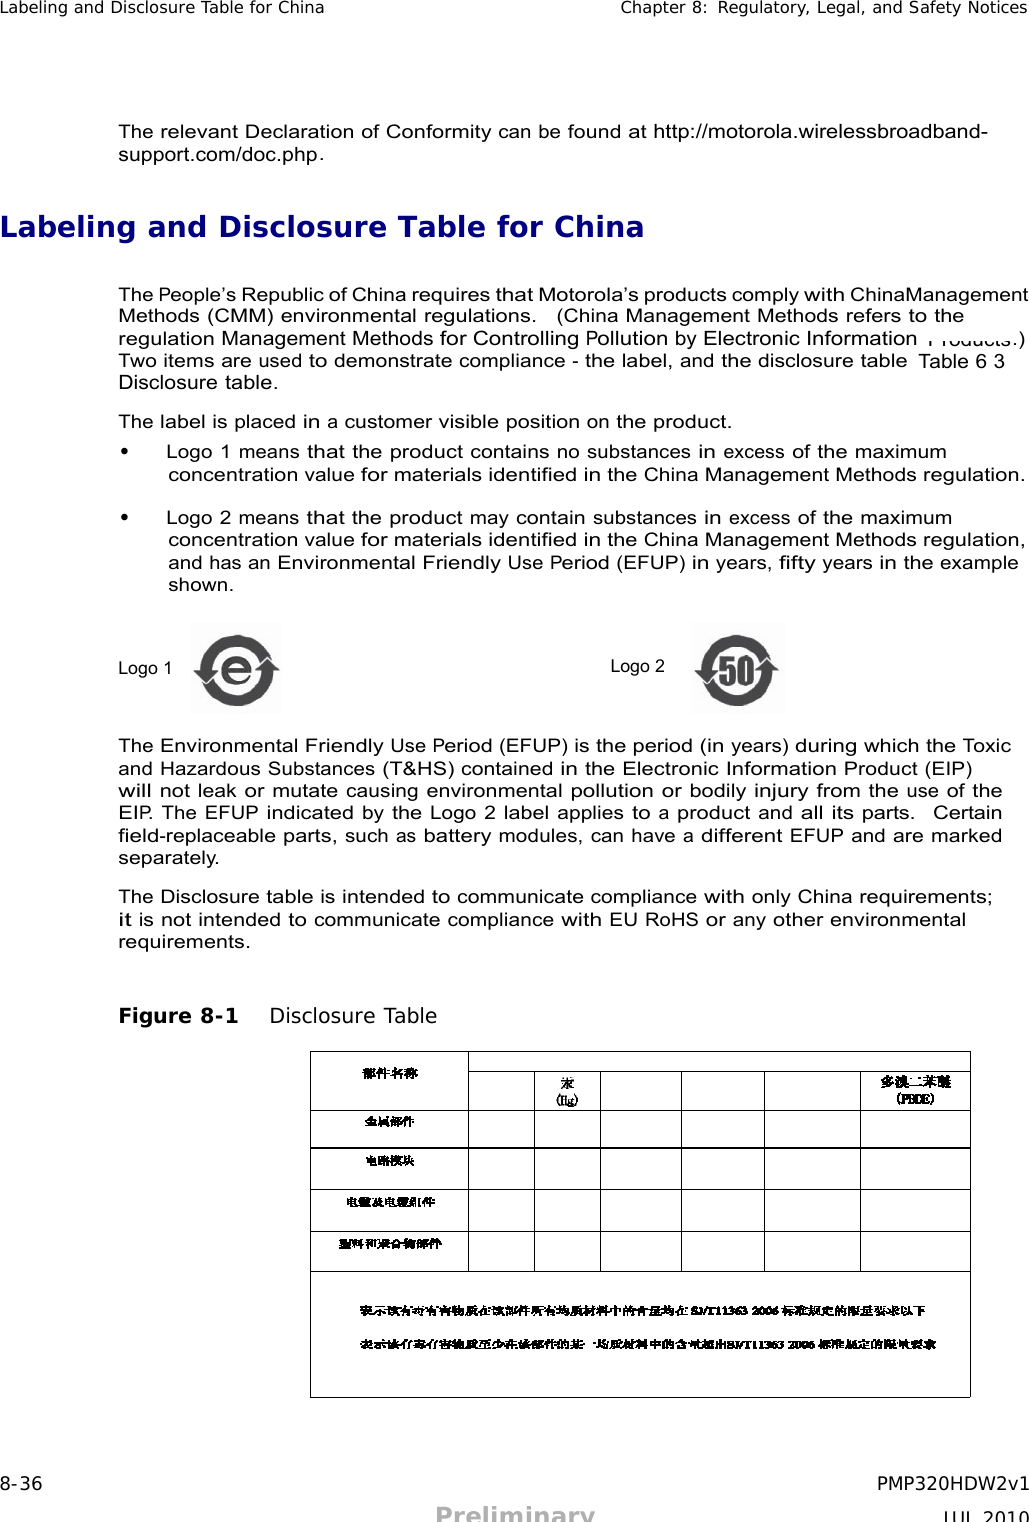 8-36 PMP320HDW2v1 Preliminary JUL 2010     ProductsLabeling and Disclosure Table for China Chapter 8: Regulatory, Legal, and Safety Notices      The relevant Declaration of Conformity can be found at http://motorola.wirelessbroadband- . support.com/doc.php   Labeling and Disclosure Table for China   The People’s Republic of China requires that Motorola’s products comply with ChinaManagement Methods (CMM) environmental regulations.  (China Management Methods refers to the regulation Management Methods for Controlling Pollution by Electronic Information .) Two items are used to demonstrate compliance - the label, and the disclosure table . Table 6 3 Disclosure table  The label is placed in a customer visible position on the product. • Logo 1 means that the product contains no substances in excess of the maximum concentration value for materials identified in the China Management Methods regulation.  • Logo 2 means that the product may contain substances in excess of the maximum concentration value for materials identified in the China Management Methods regulation, and has an Environmental Friendly Use Period (EFUP) in years, fifty years in the example shown.  Logo 1                                     Logo 2      The Environmental Friendly Use Period (EFUP) is the period (in years) during which the Toxic and Hazardous Substances (T&amp;HS) contained in the Electronic Information Product (EIP) will not leak or mutate causing environmental pollution or bodily injury from the use of the EIP. The EFUP indicated by the Logo 2 label applies to a product and all its parts.  Certain field-replaceable parts, such as battery modules, can have a different EFUP and are marked separately.  The Disclosure table is intended to communicate compliance with only China requirements; it is not intended to communicate compliance with EU RoHS or any other environmental requirements.   Figure 8-1   Disclosure Table                                                              